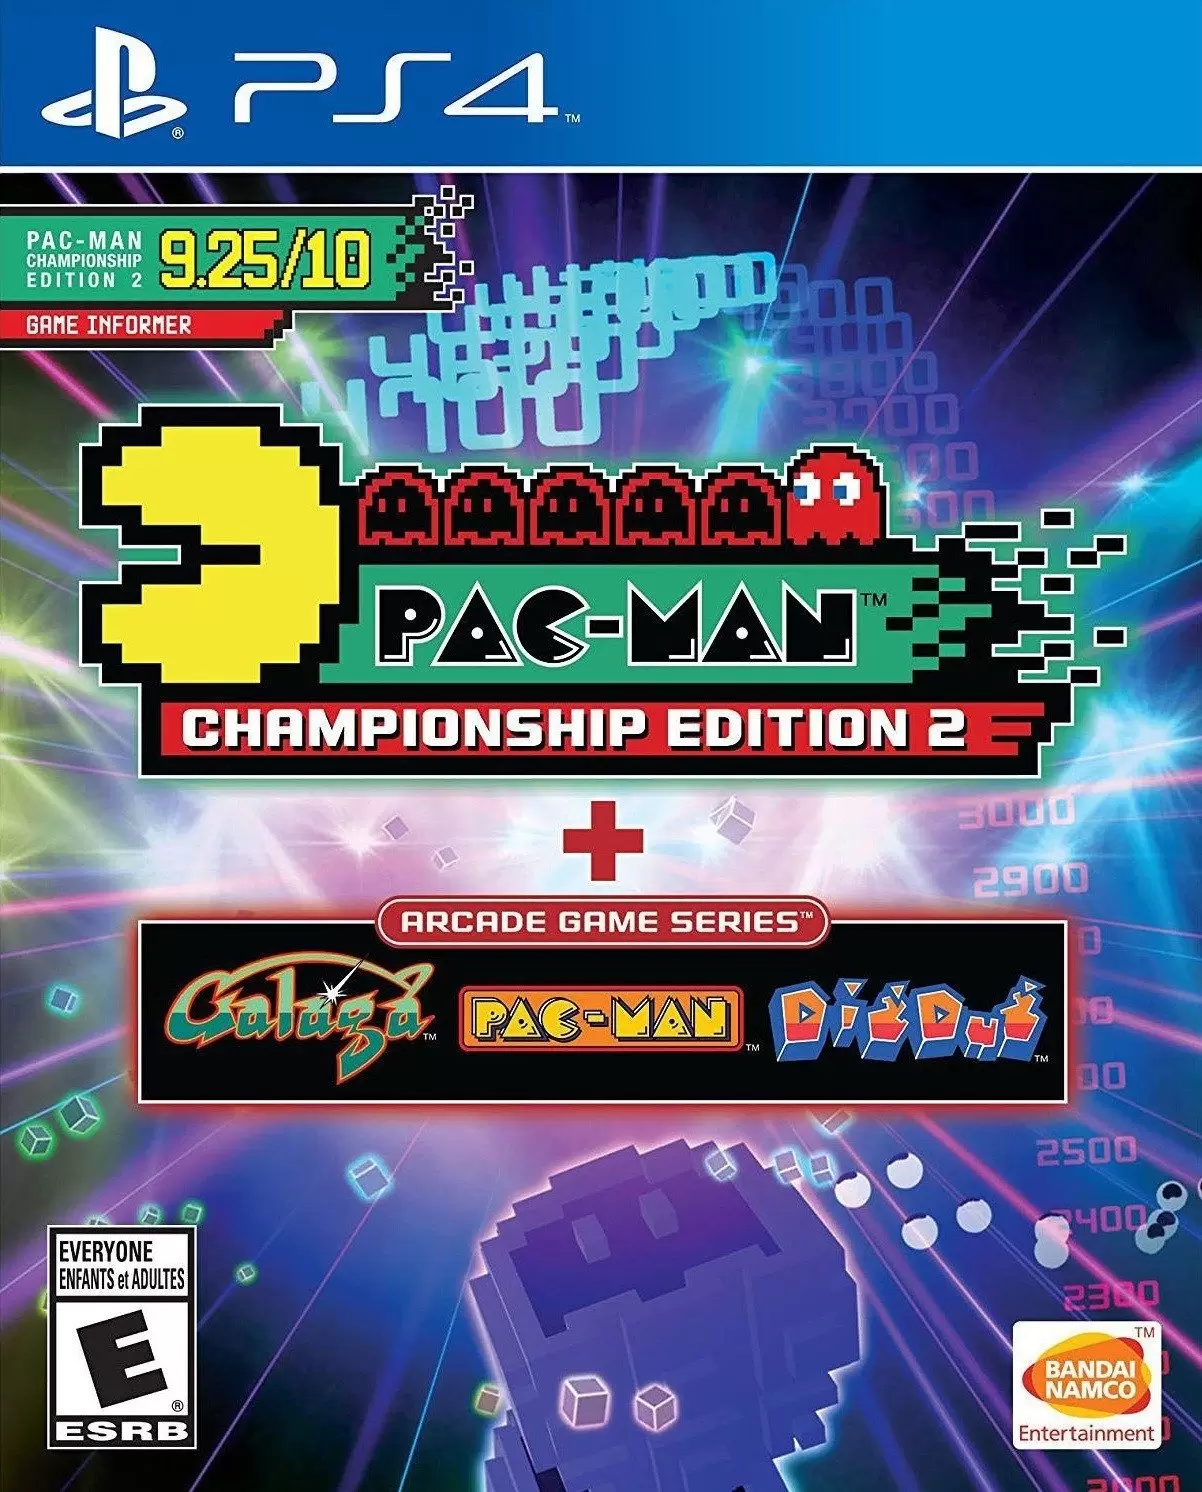 Jeux PS4 - Pac-Man Championship Edition 2 + Arcade Game Series